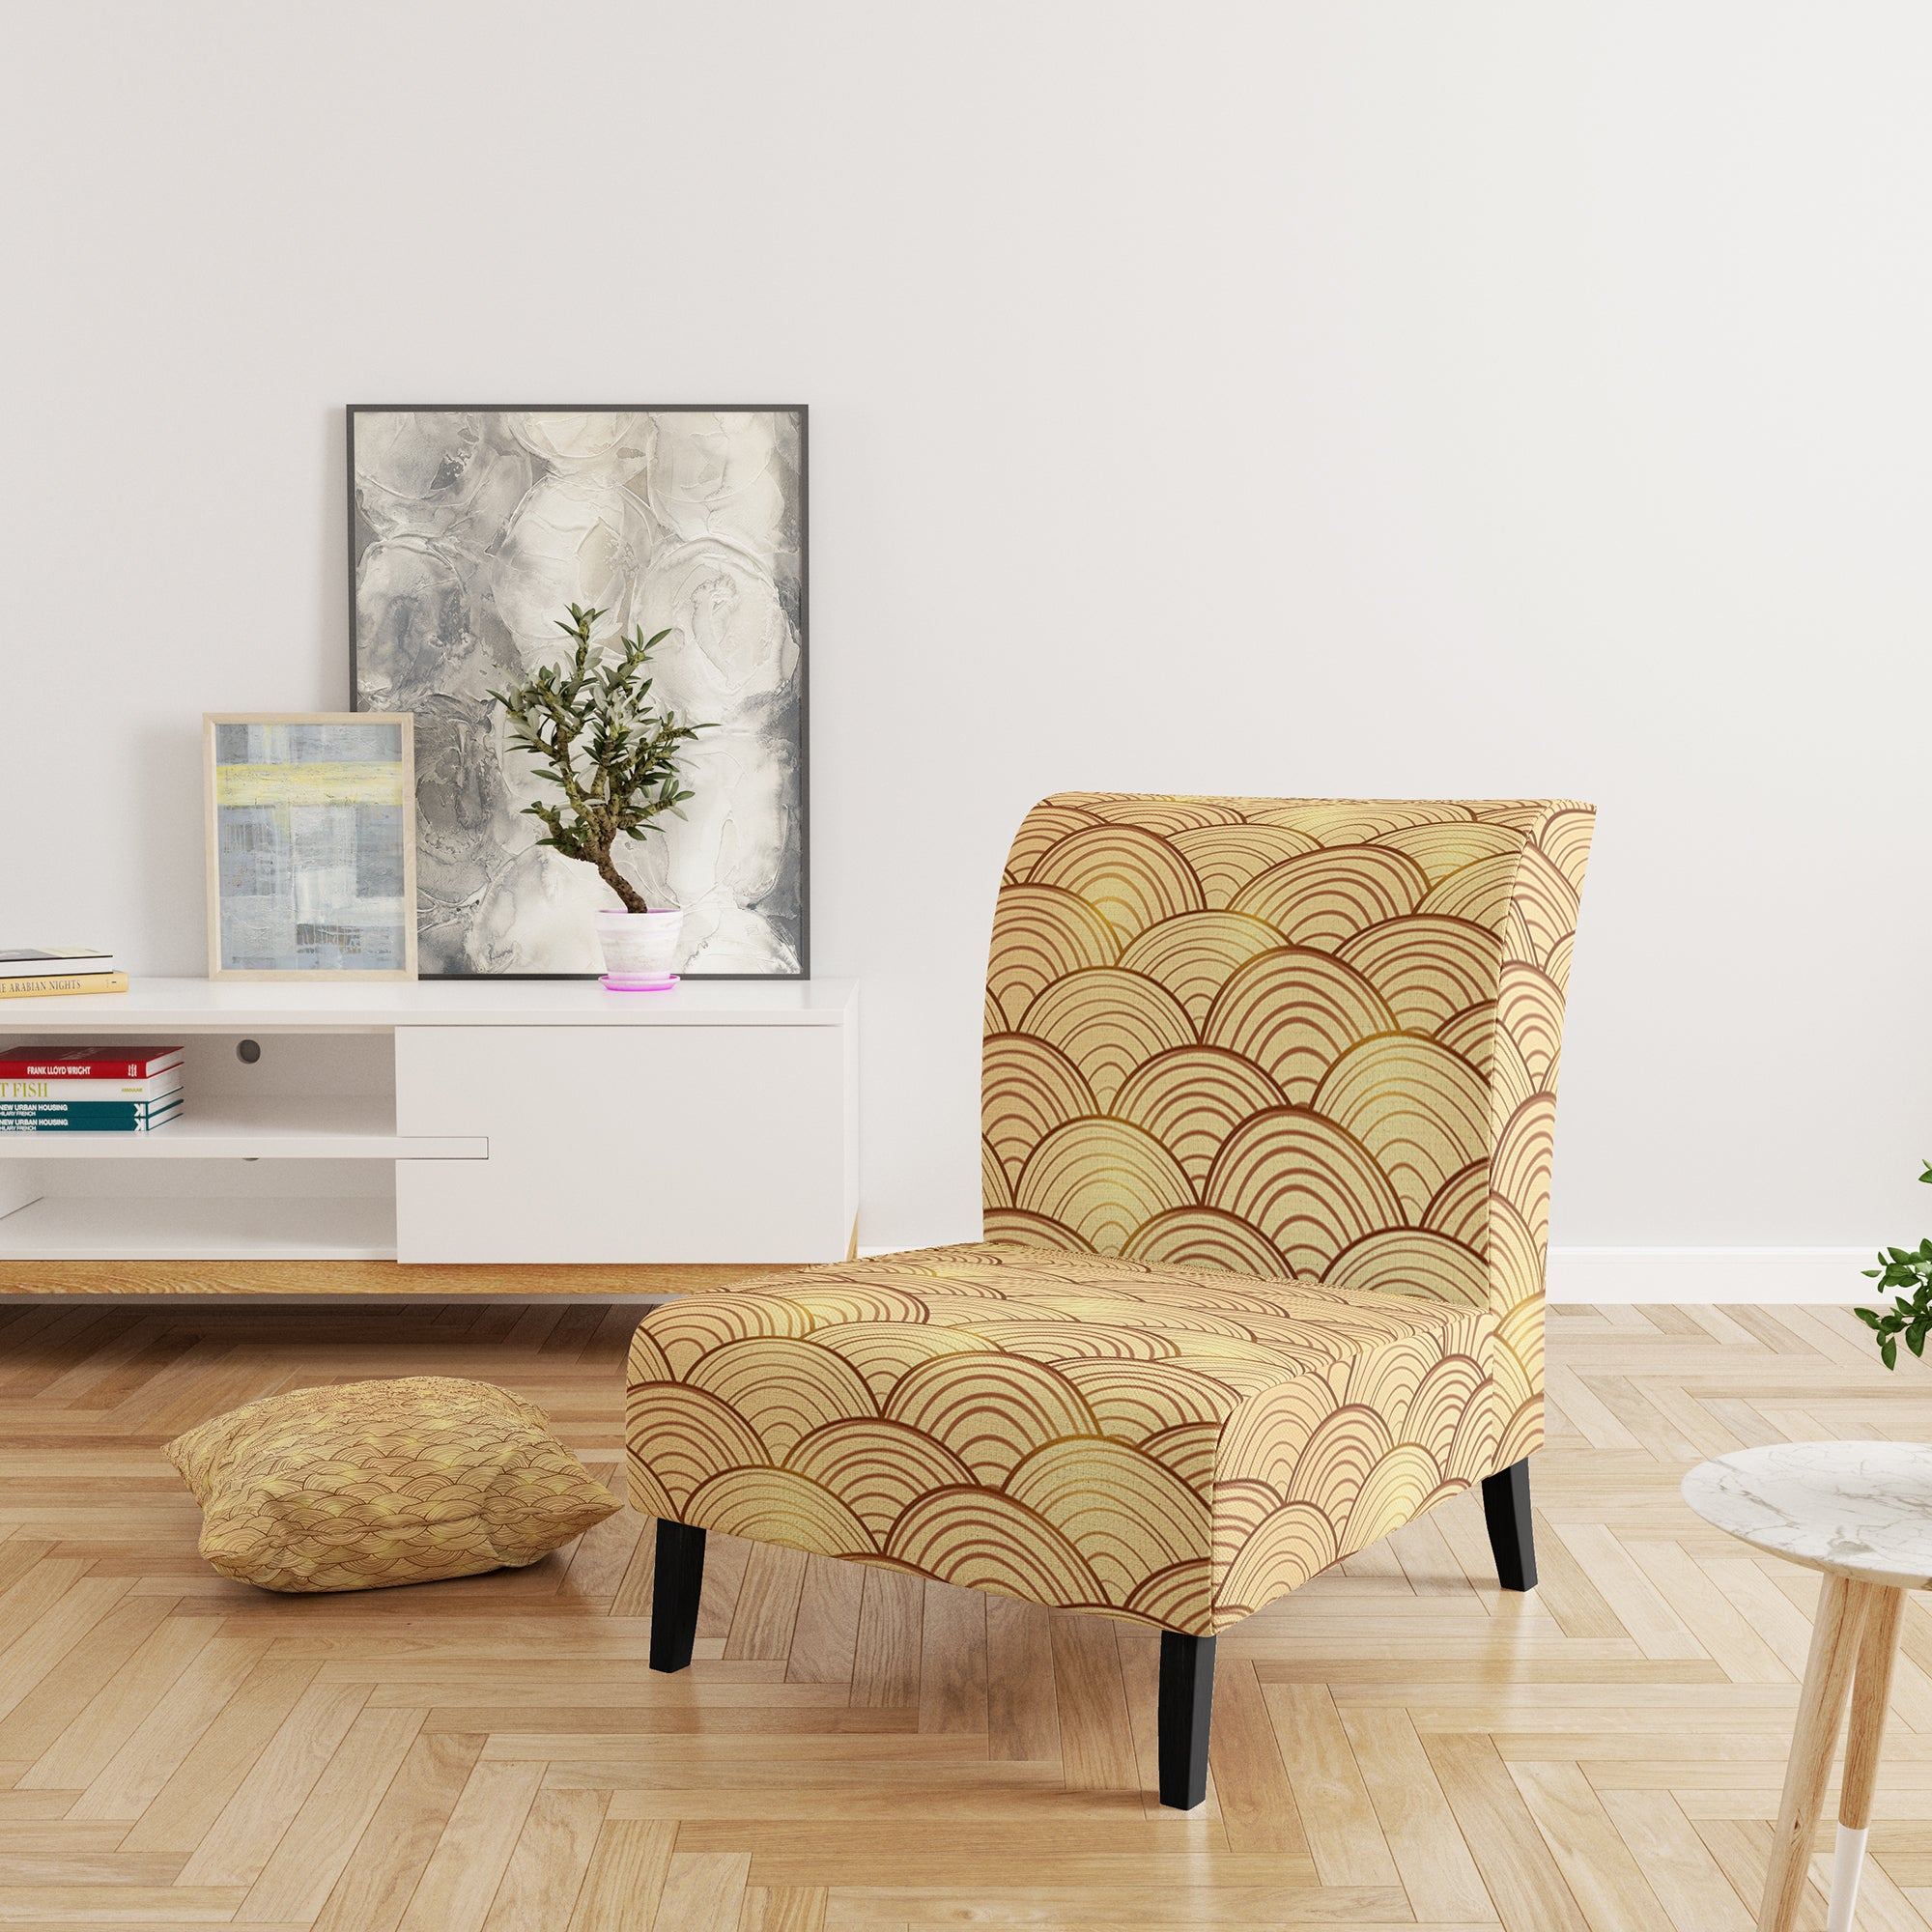 Golden Clouds In The Sky Mid-Century Accent Chair